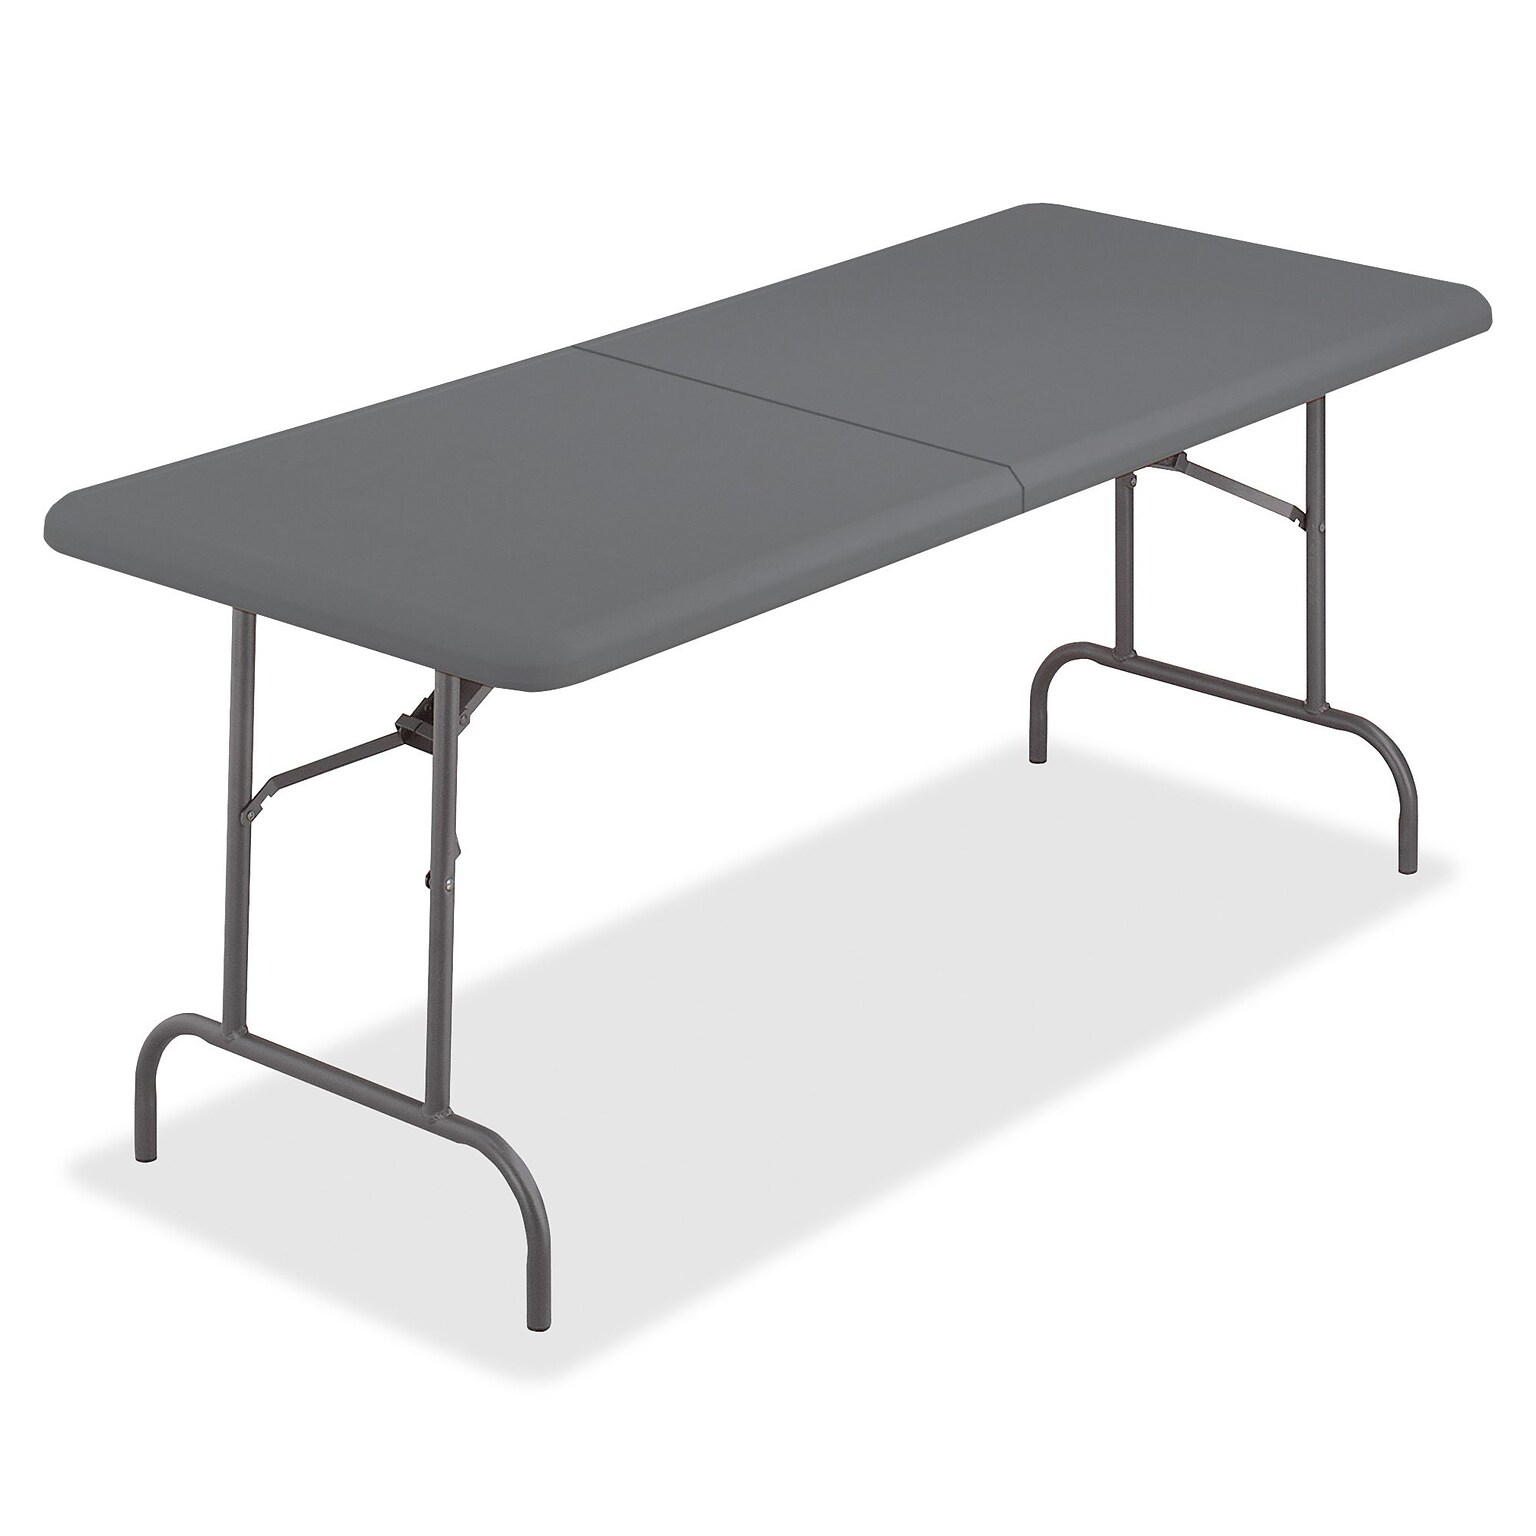 Iceberg IndestrucTable TOO Bifold Table, Rectangle Top, 60Table Top L x 30Table Top W x 2Table Top Thickness, 29H, Charcoal